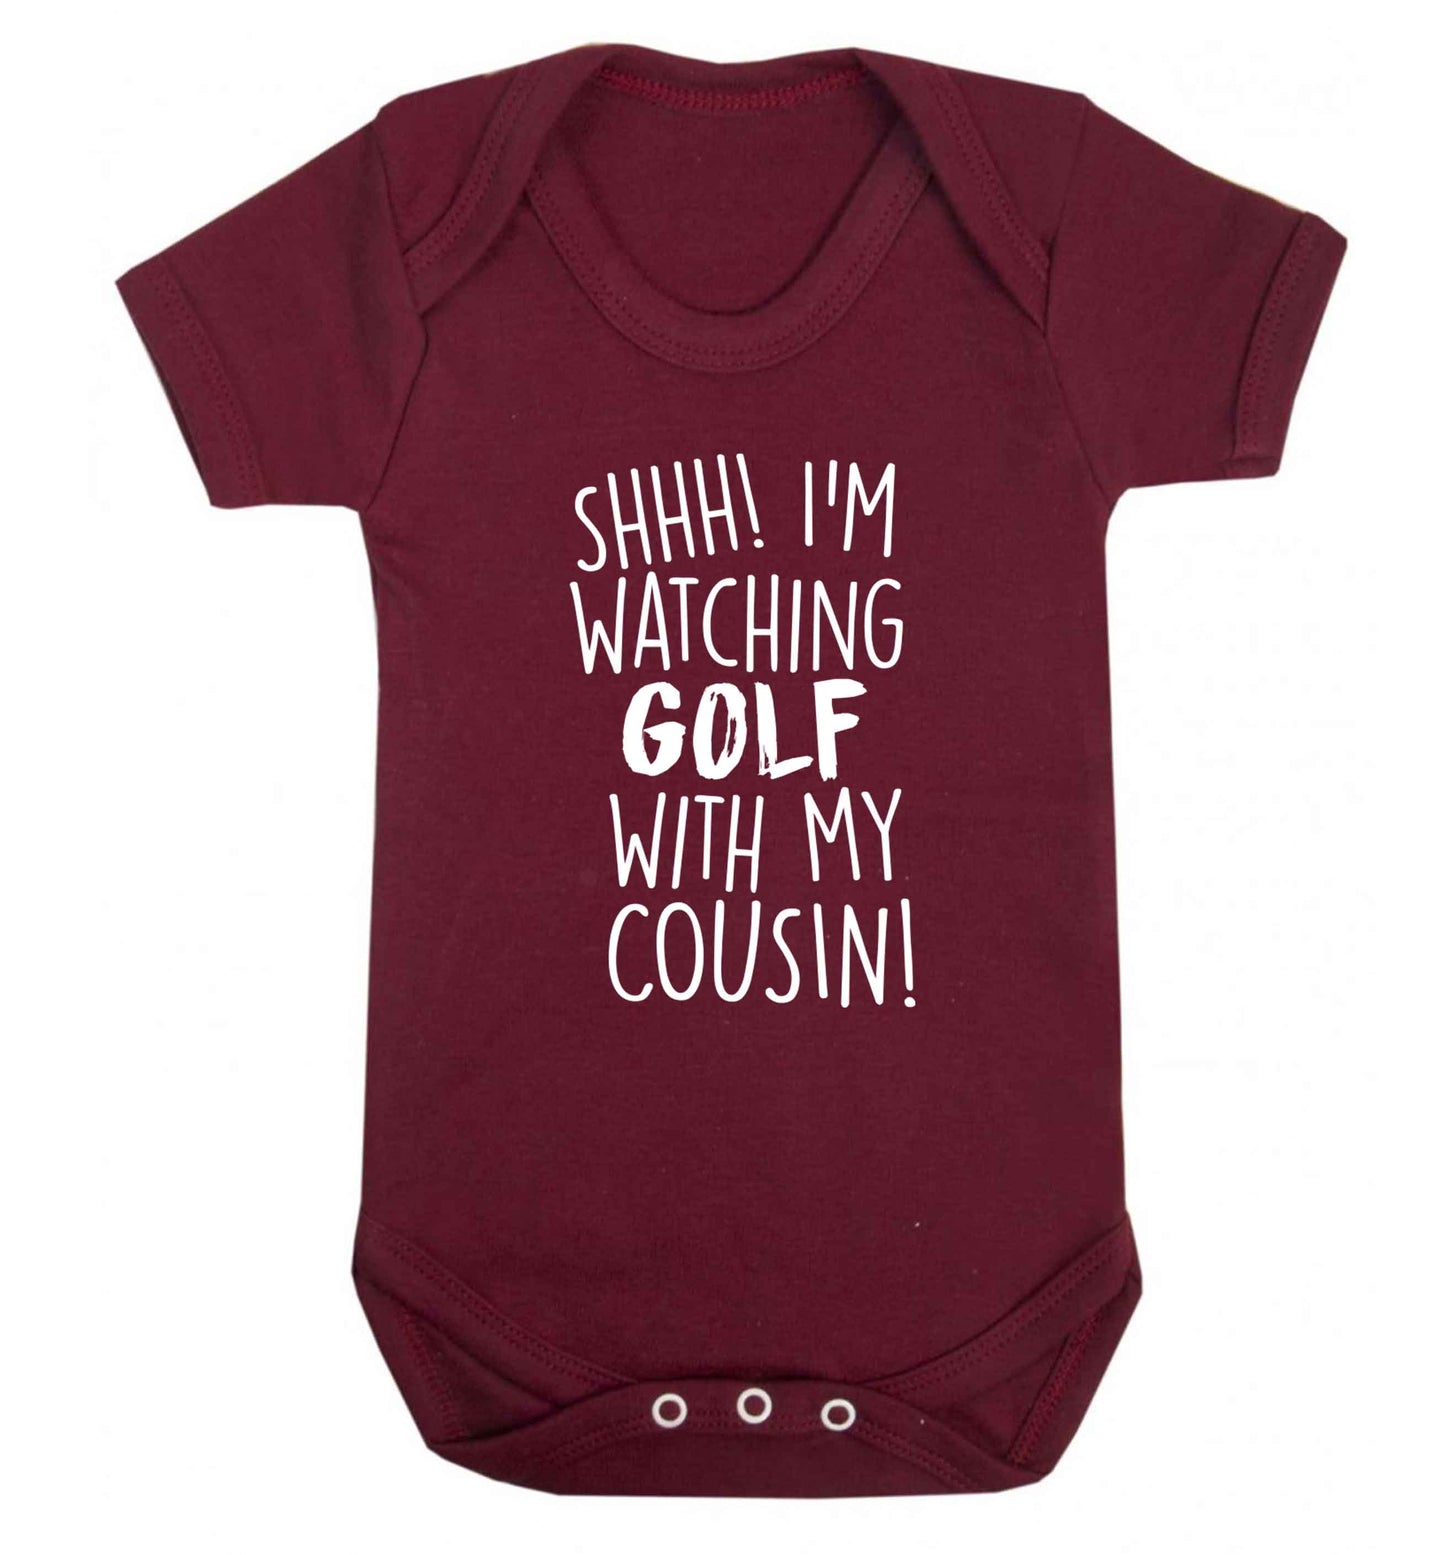 Shh I'm watching golf with my cousin Baby Vest maroon 18-24 months